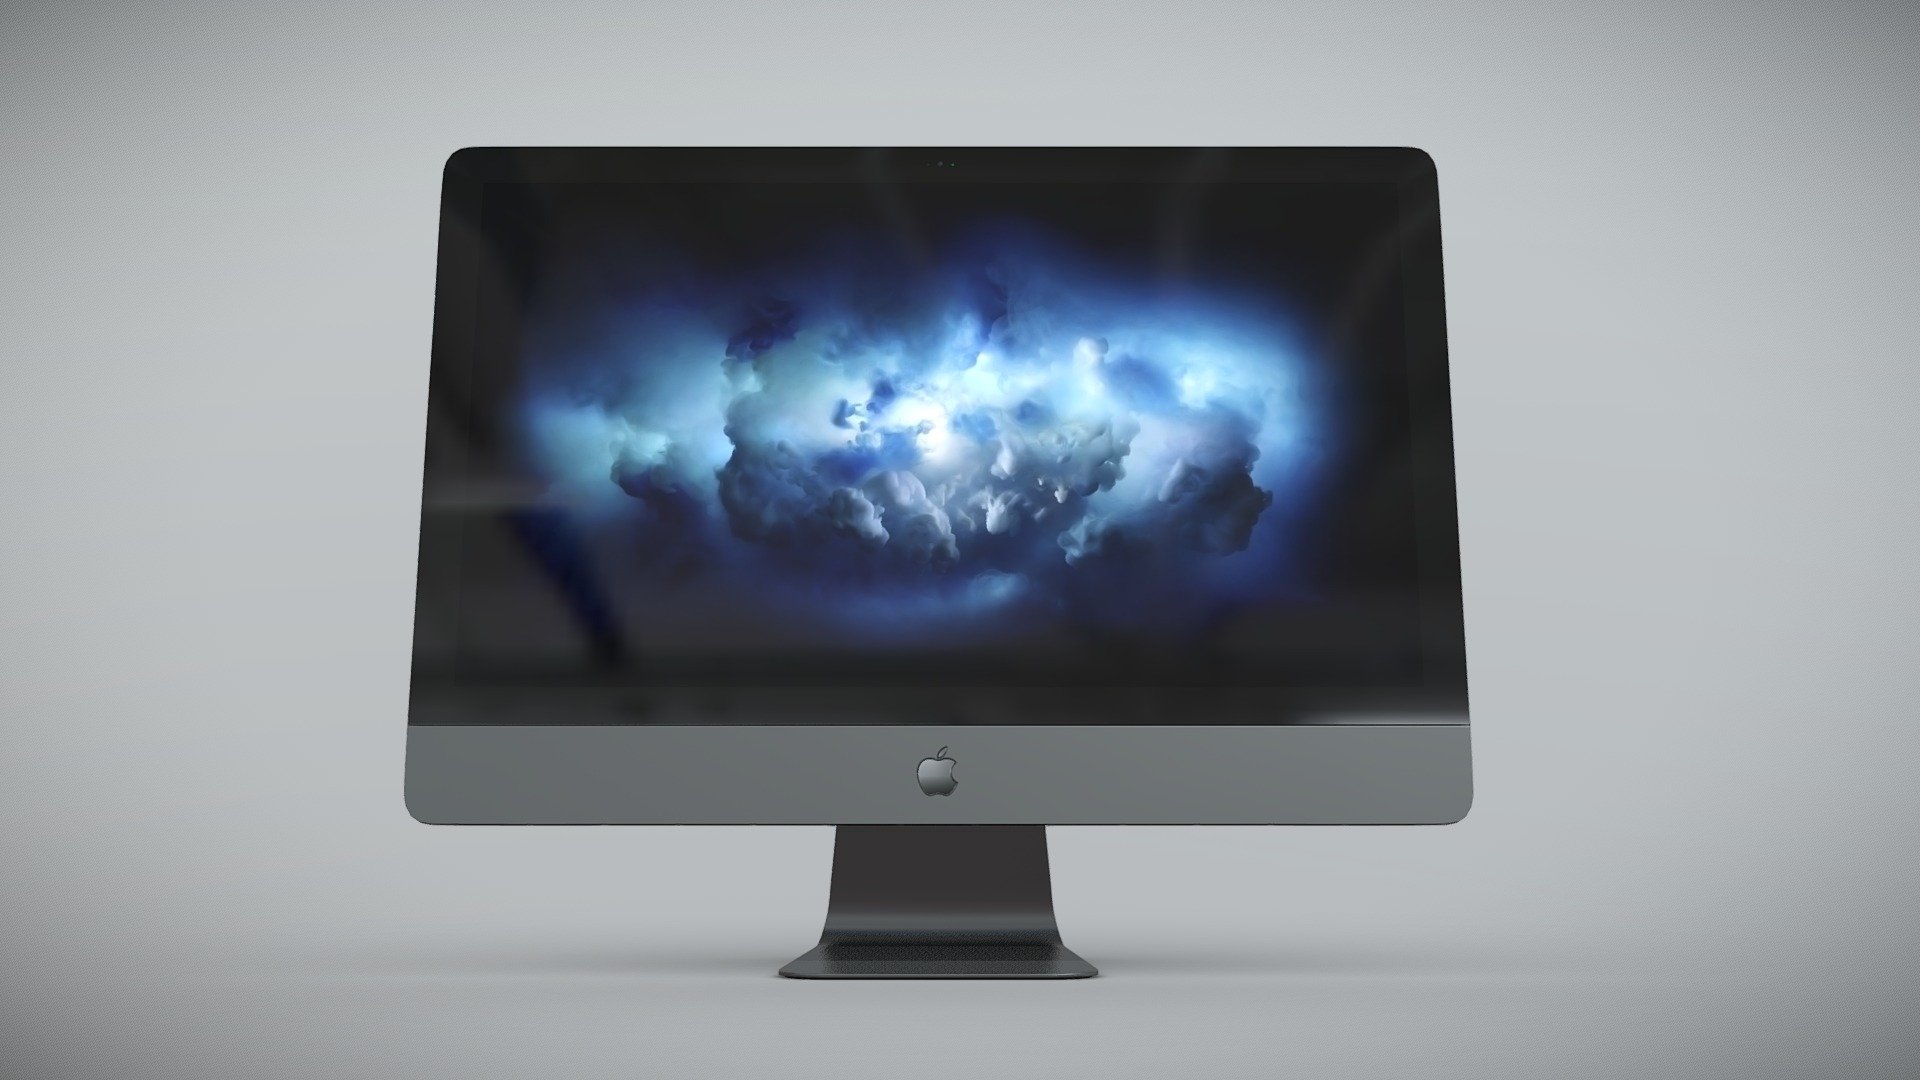 •   Let me present to you high-quality low-poly 3D model Apple iMac Pro with Retina 5K 27inch Display (since 2017 - 2019). Modeling was made with ortho-photos of real computer that is why all details of design are recreated most authentically.

•    This model consists of one mesh, it is low-polygonal and it has only one material.

•   The total of the main textures is 5. Resolution of all textures is 4096 pixels square aspect ratio in .png format. Also there is original texture file .PSD format in separate archive.

•   Polygon count of the model is – 2871.

•   The model has correct dimensions in real-world scale. All parts grouped and named correctly.

•   To use the model in other 3D programs there are scenes saved in formats .fbx, .obj, .DAE, .max (2010 version).

Note: If you see some artifacts on the textures, it means compression works in the Viewer. We recommend setting HD quality for textures. But anyway, original textures have no artifacts 3d model